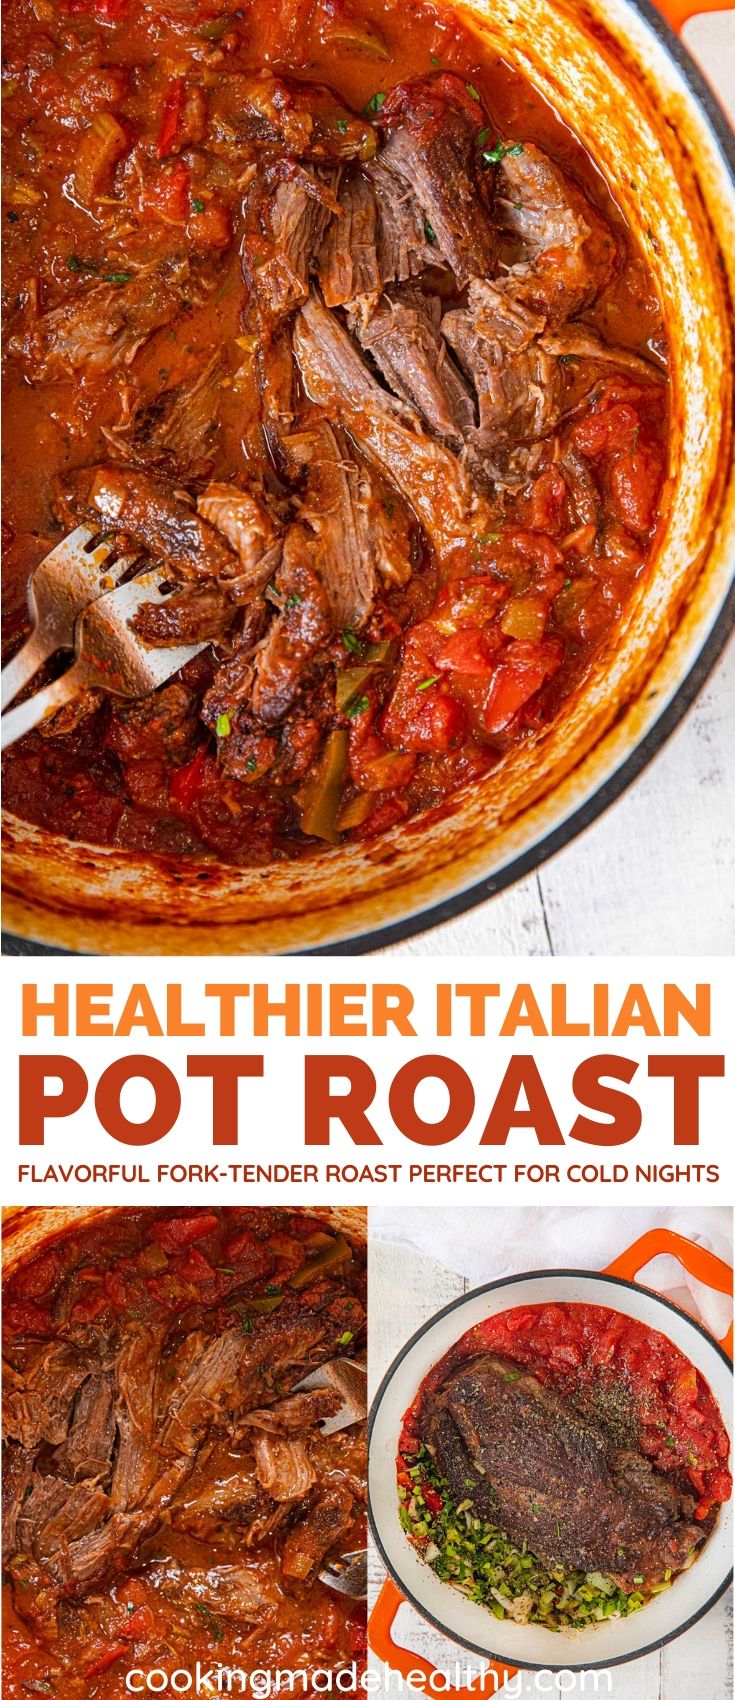 Easy and healthy pot roast